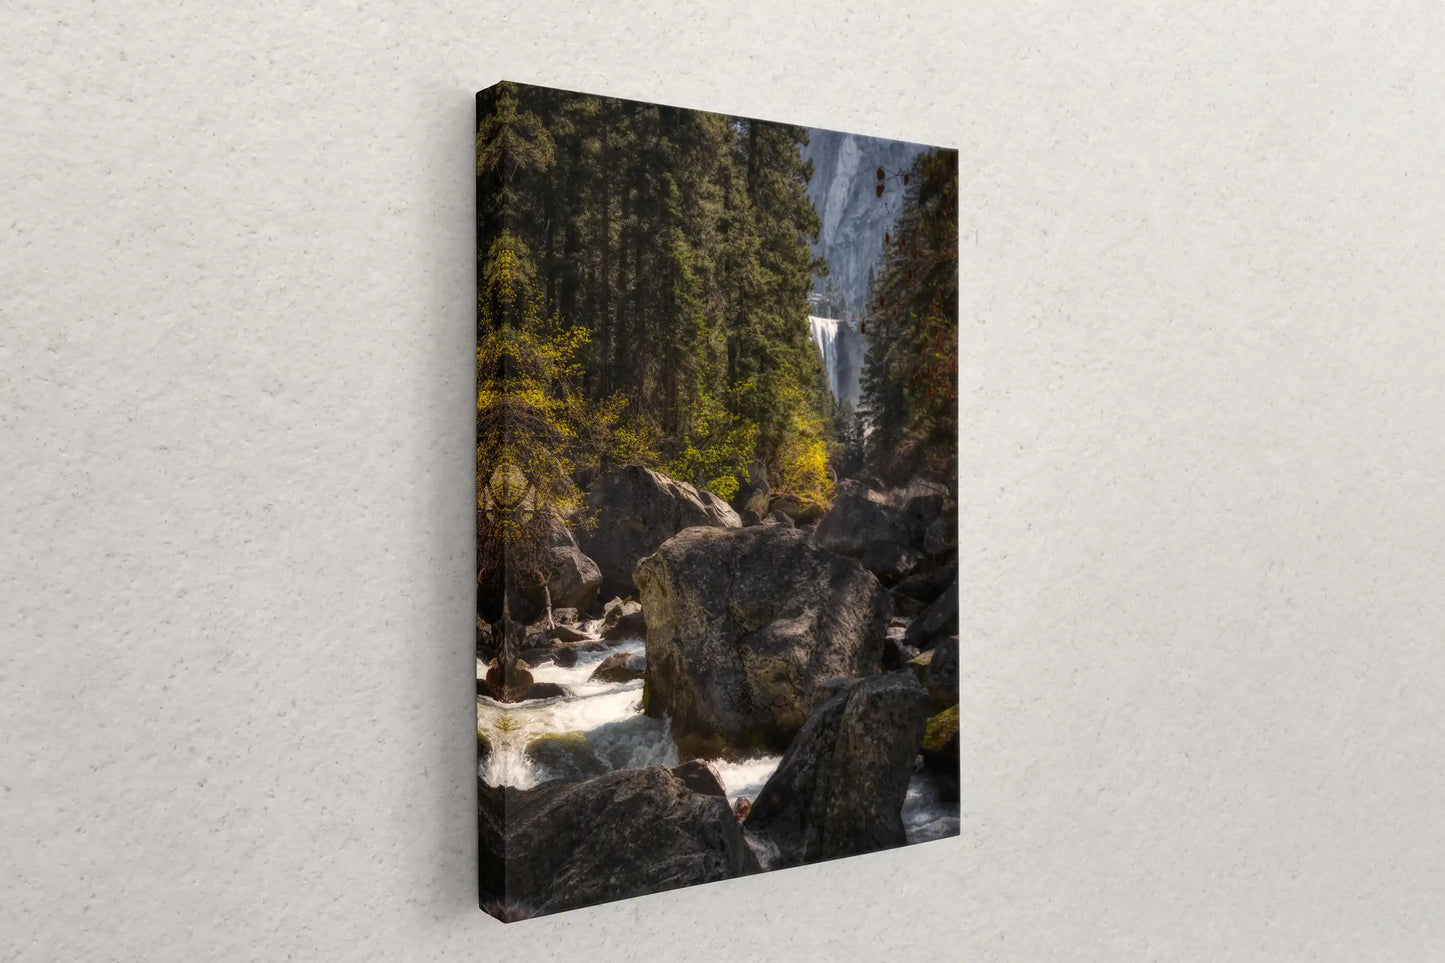 A canvas print mounted on a wall showcasing Vernal Falls in Yosemite, offering a natural touch to the room.